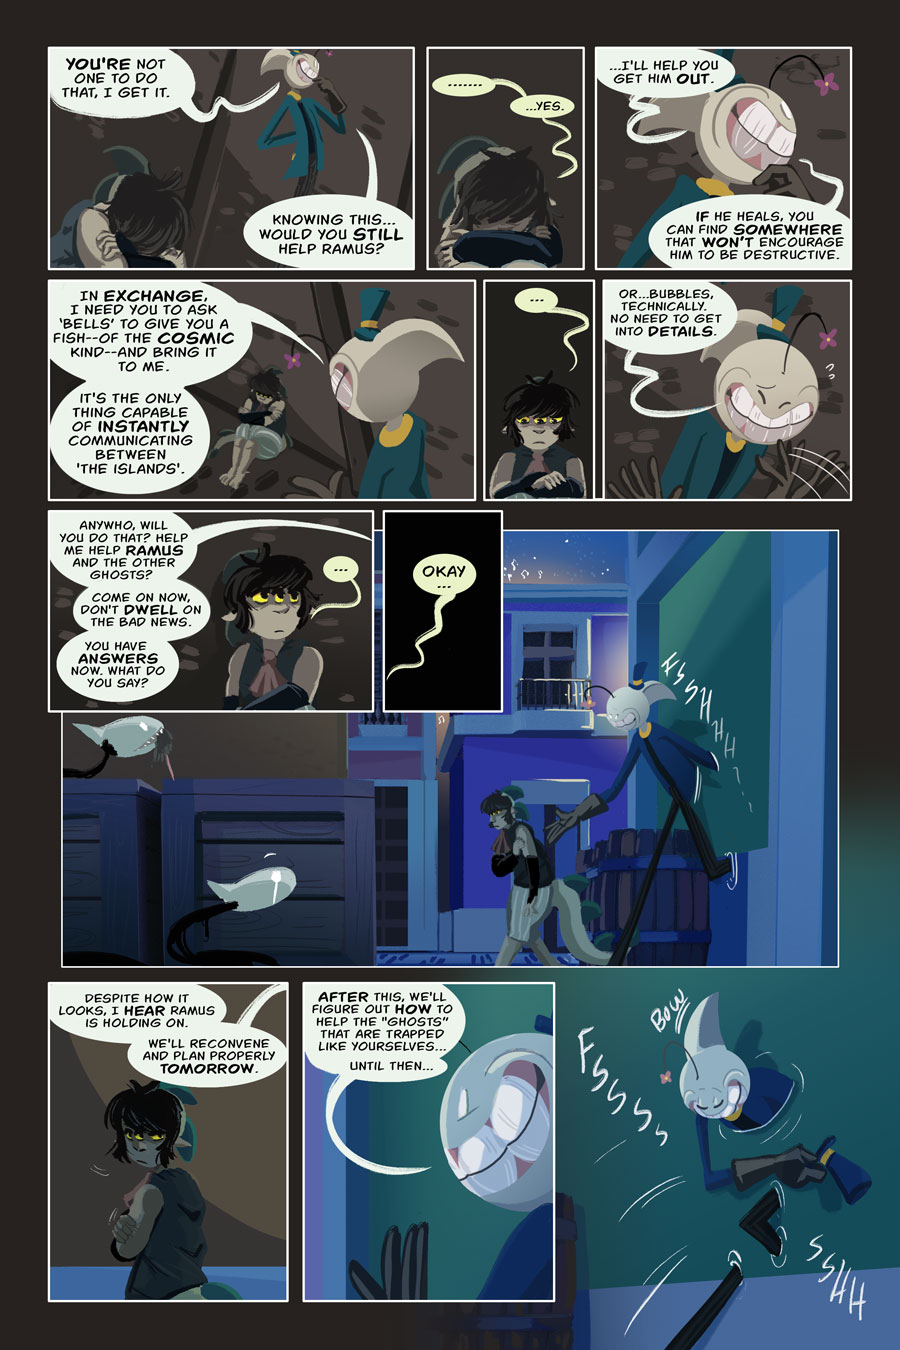 Chapter 8, page 34